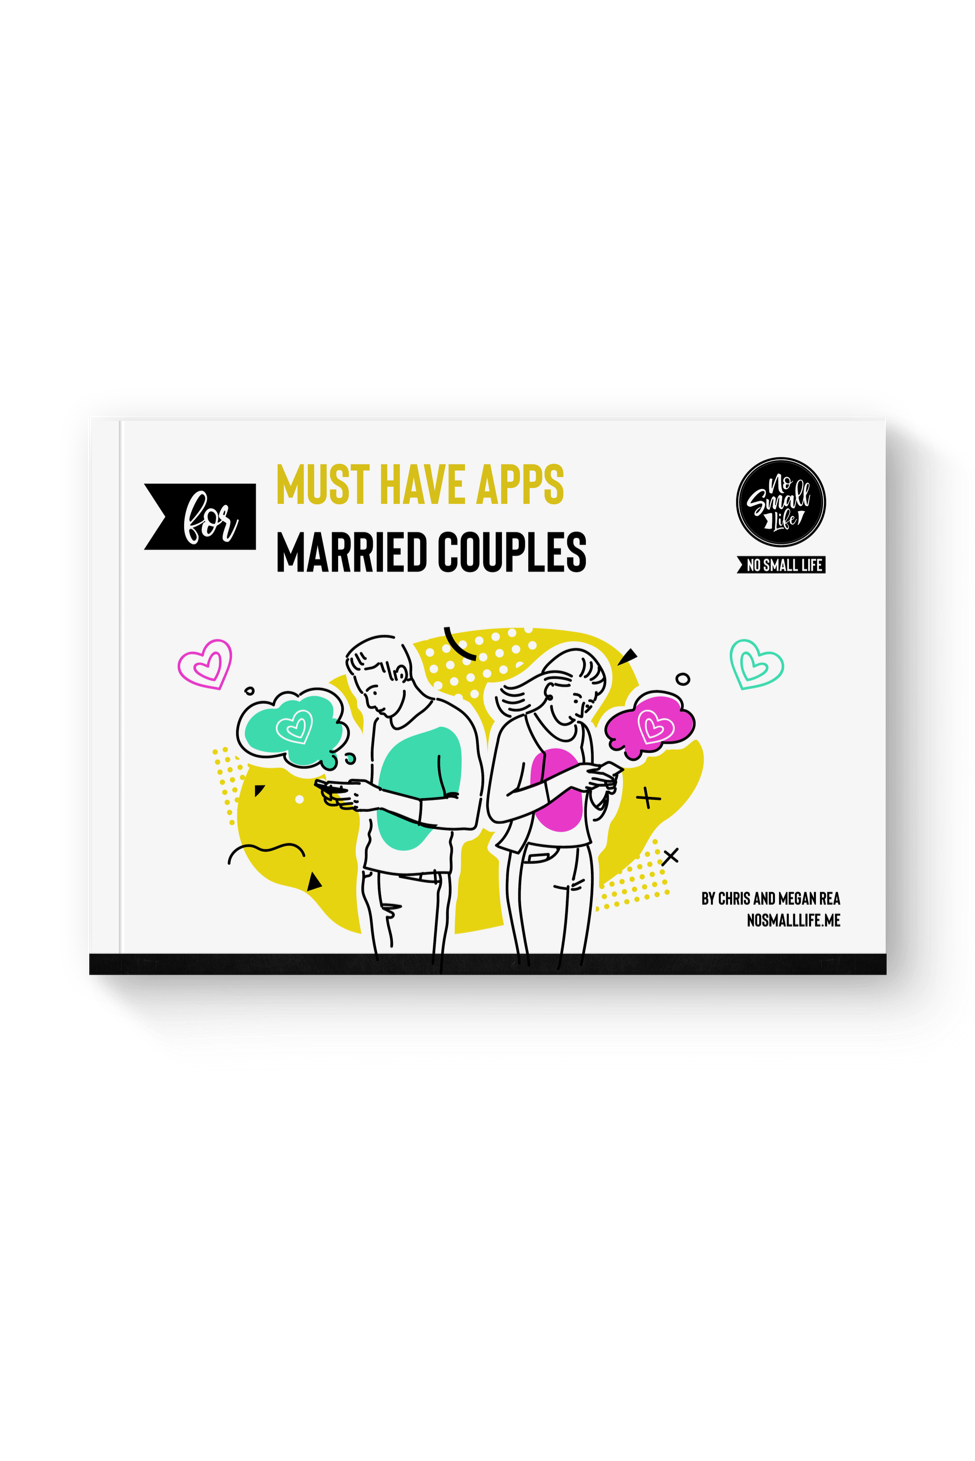 Must have apps for married couples